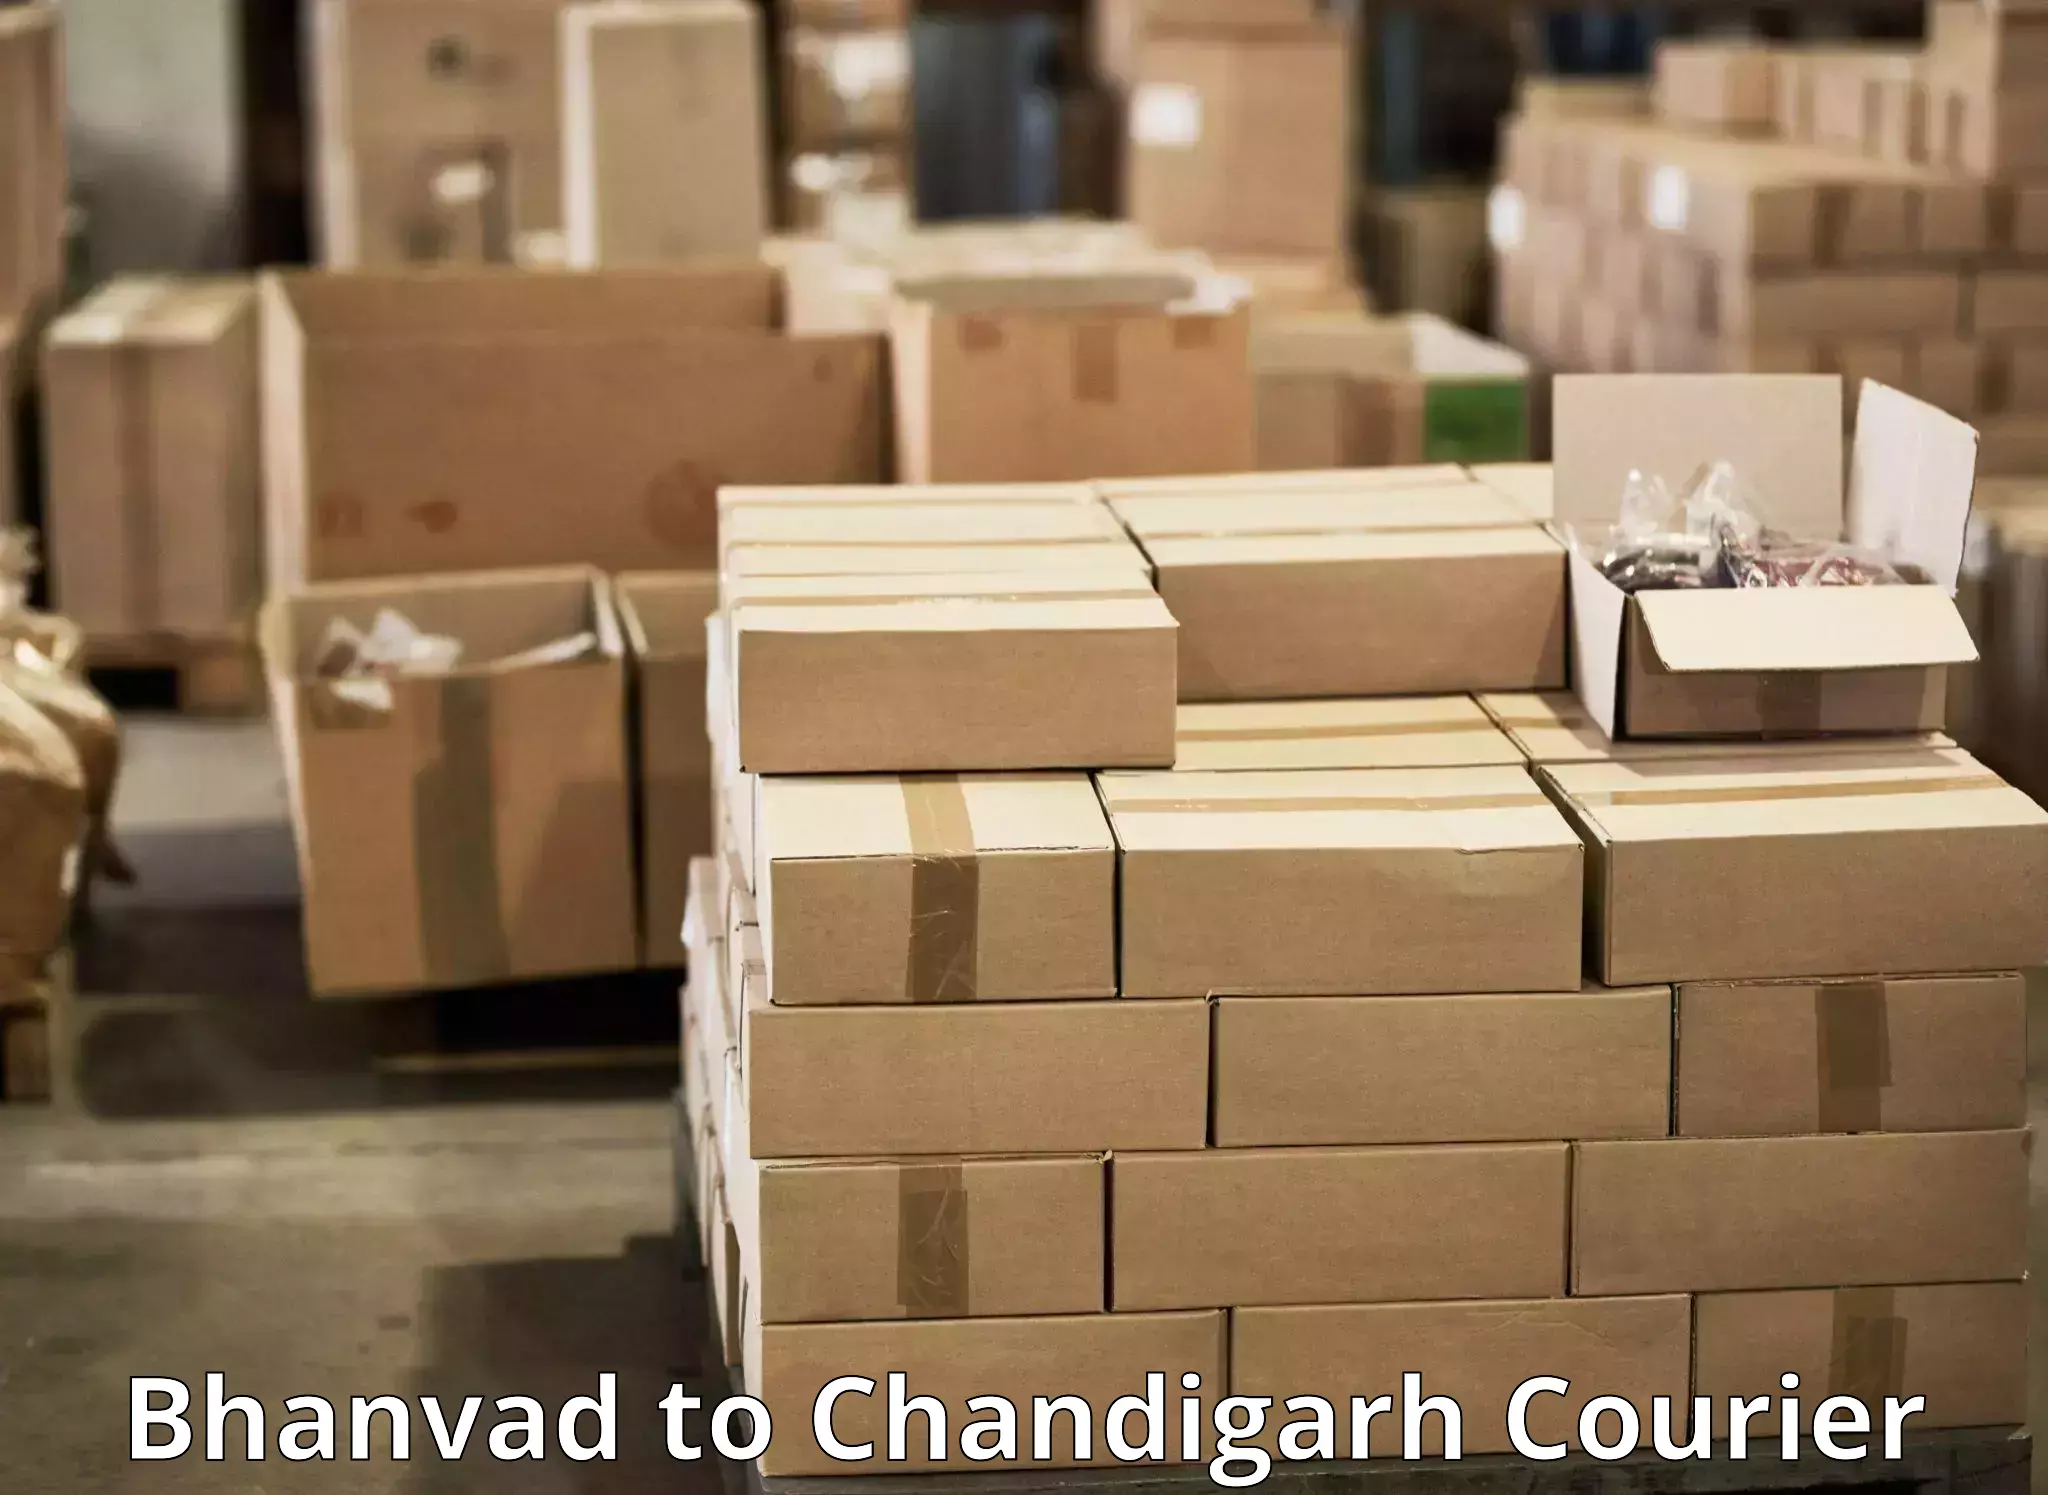 24/7 courier service Bhanvad to Chandigarh